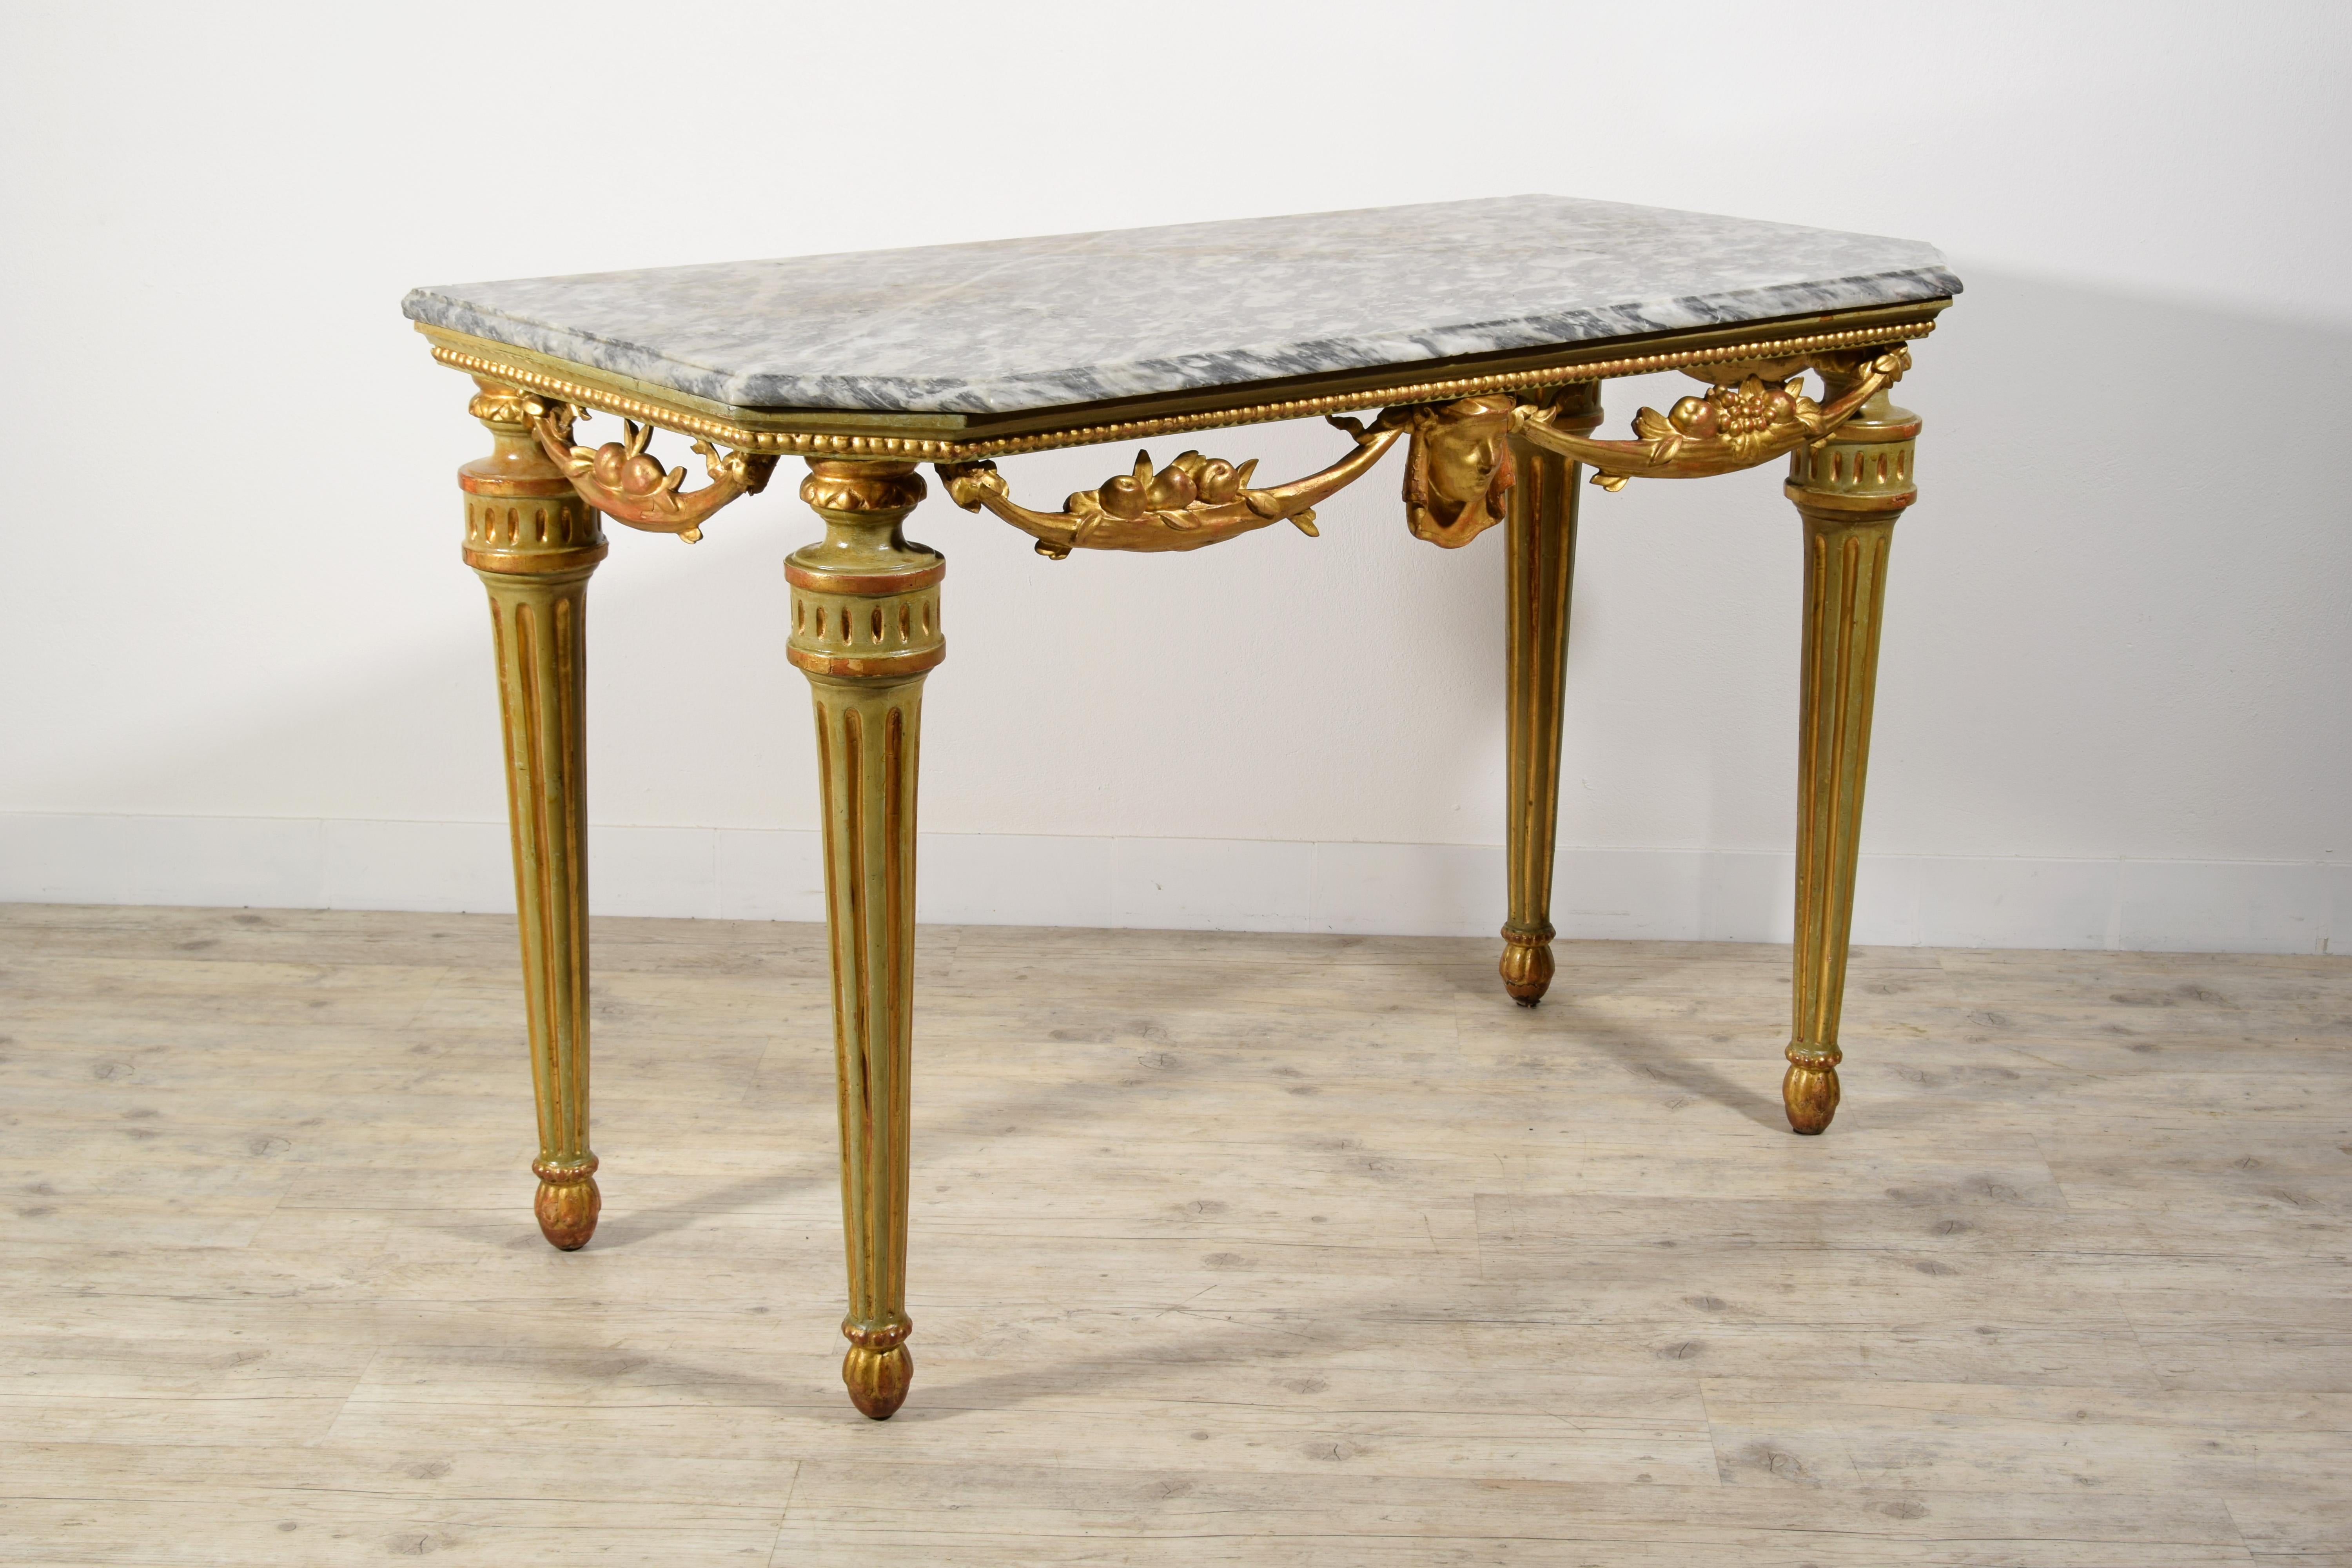 18th century, Italian neoclassical lacquered and gilt wood console table 

This elegant console was made in Italy in the Neoclassical era, in the second half of the eighteenth century. The top, of quadrangular shape with front corners cut at 45